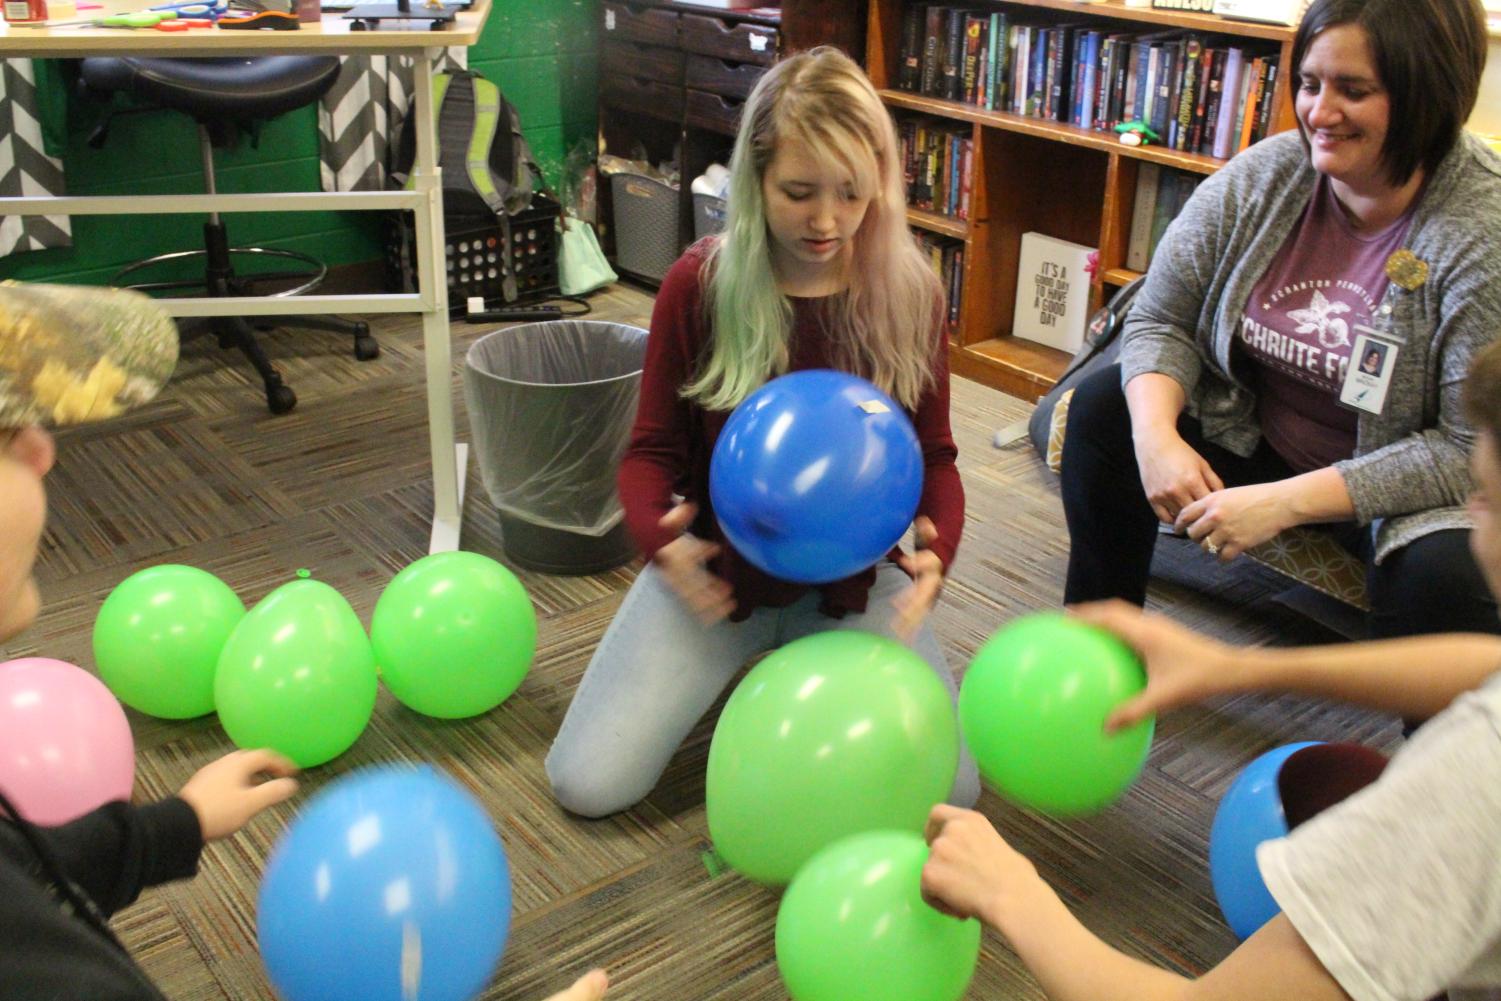 1%2F18%2F22+Mrs.+Mackays+class+making+towers+out+of+balloons+%28Photos+by+Laurisa+Rooney%29